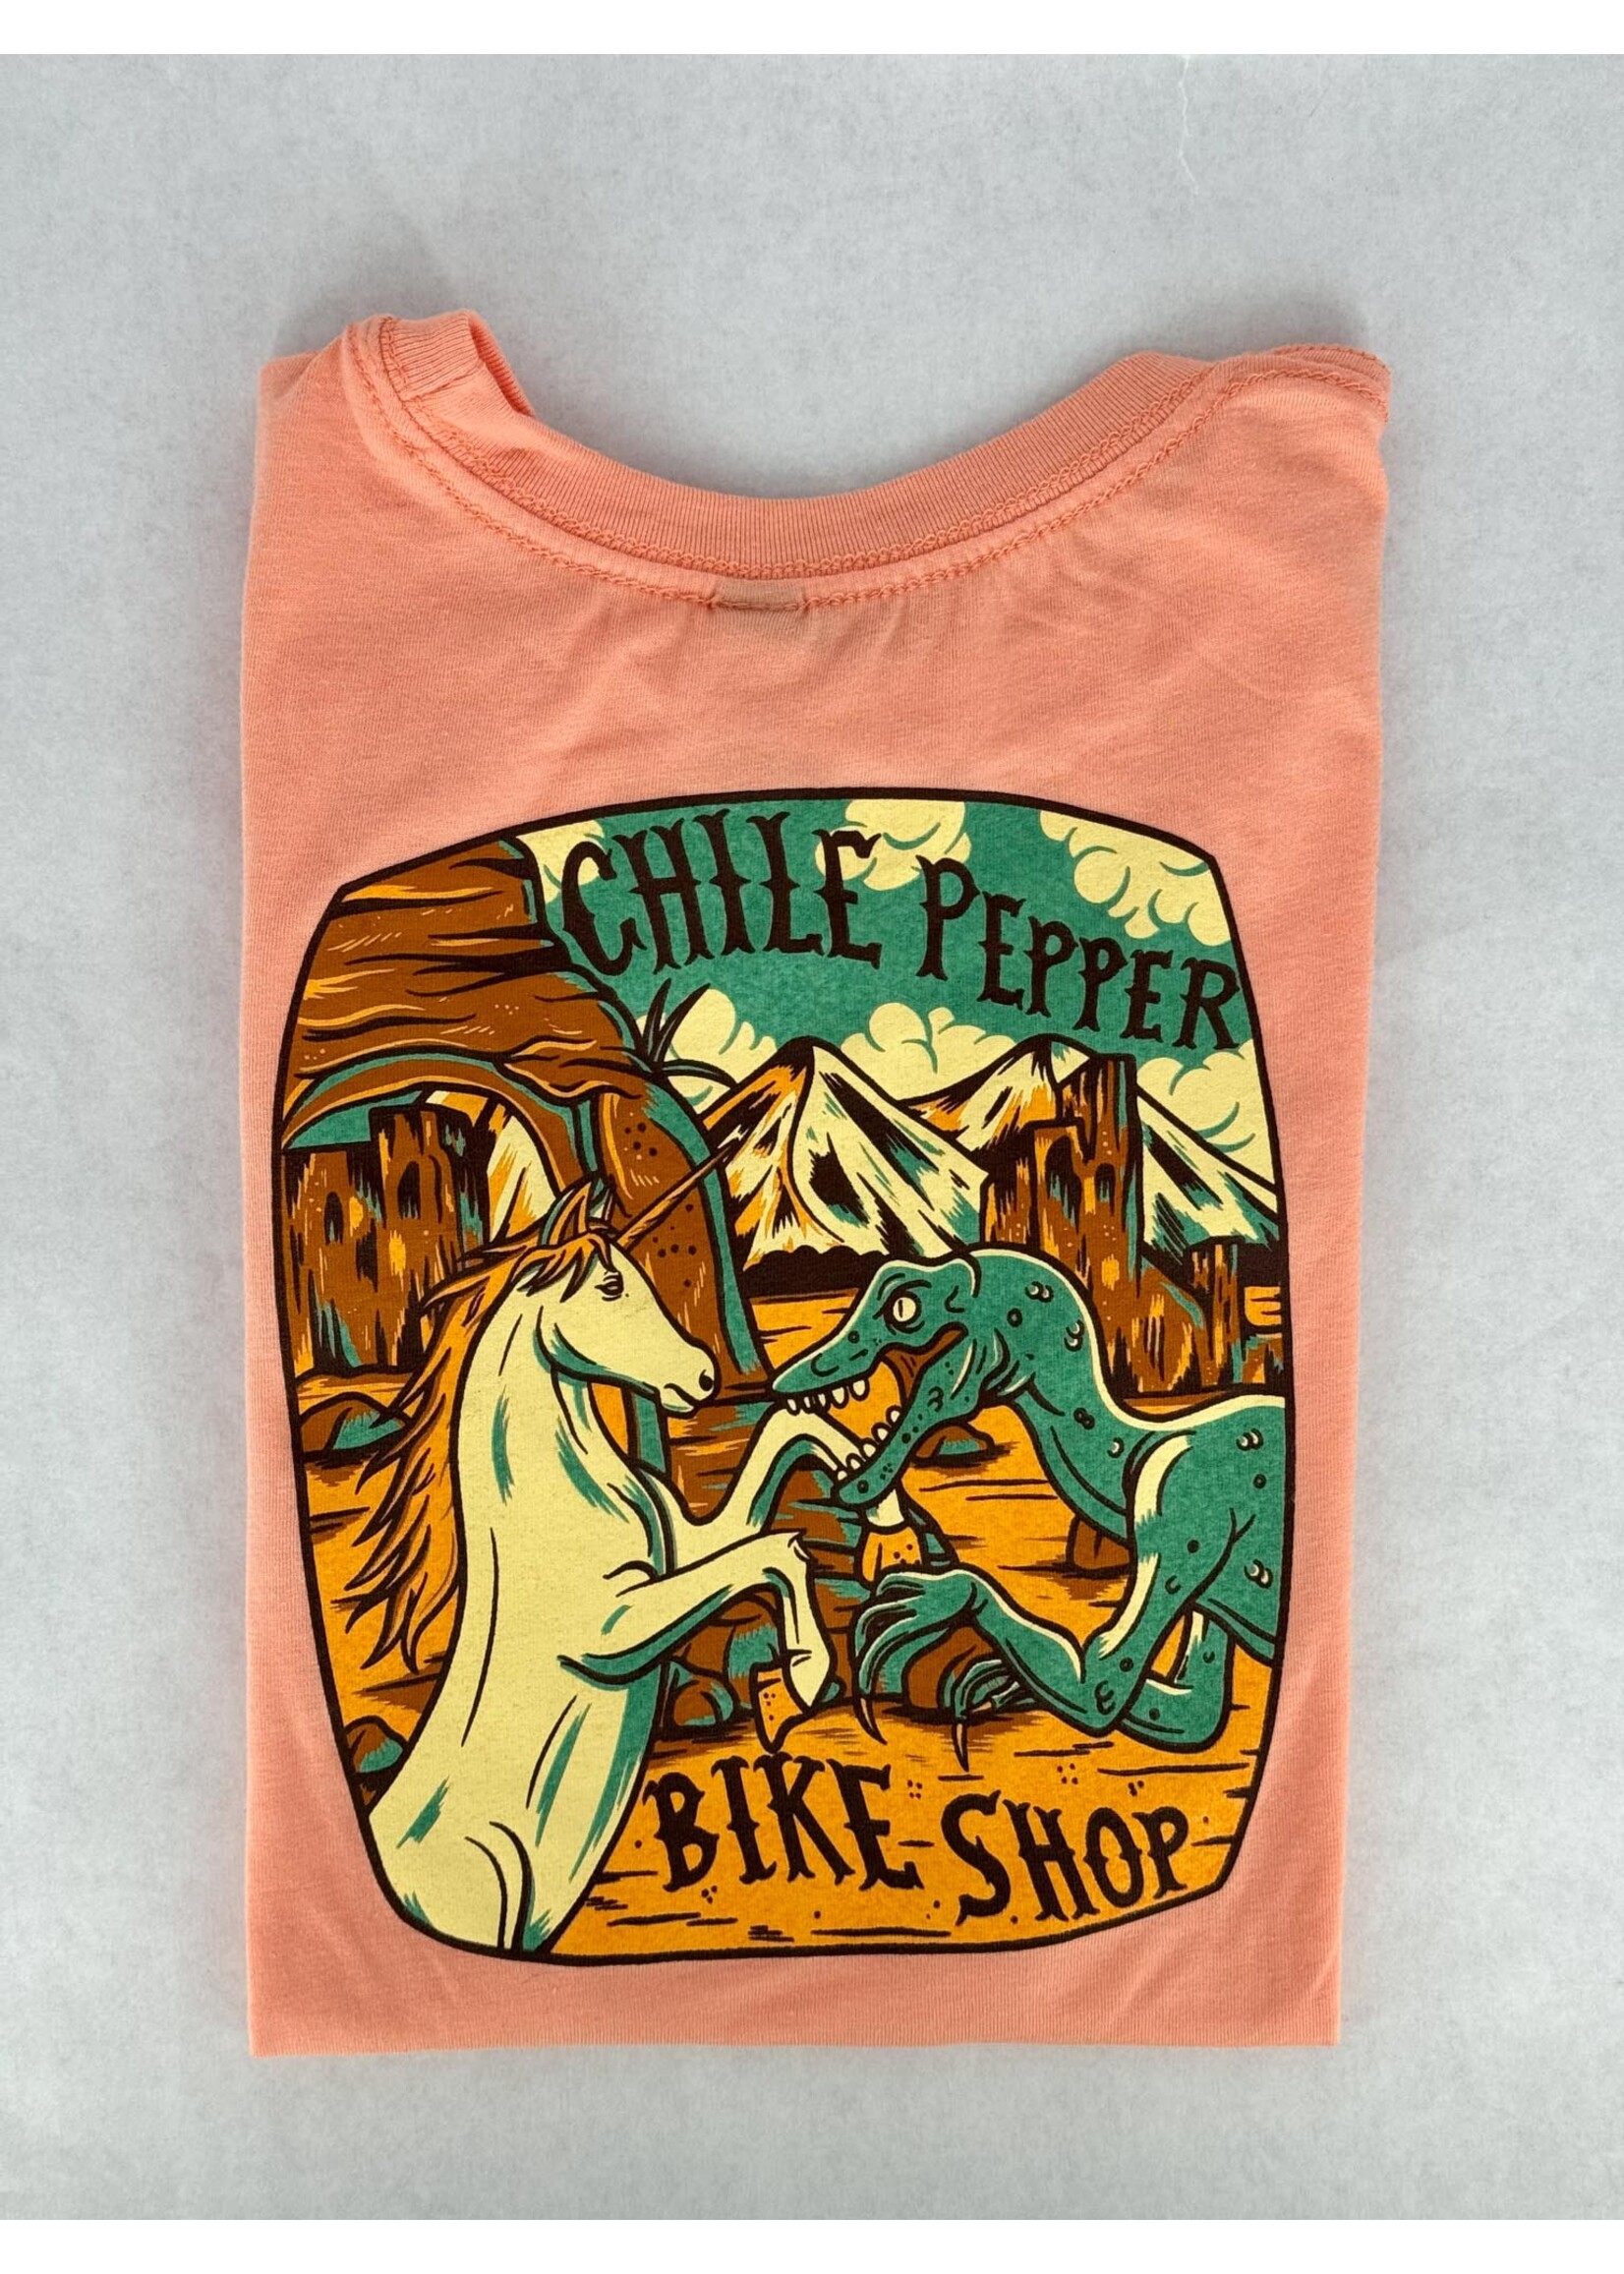 Chile Pepper Chile Pepper Dino Joey Tee - Women's